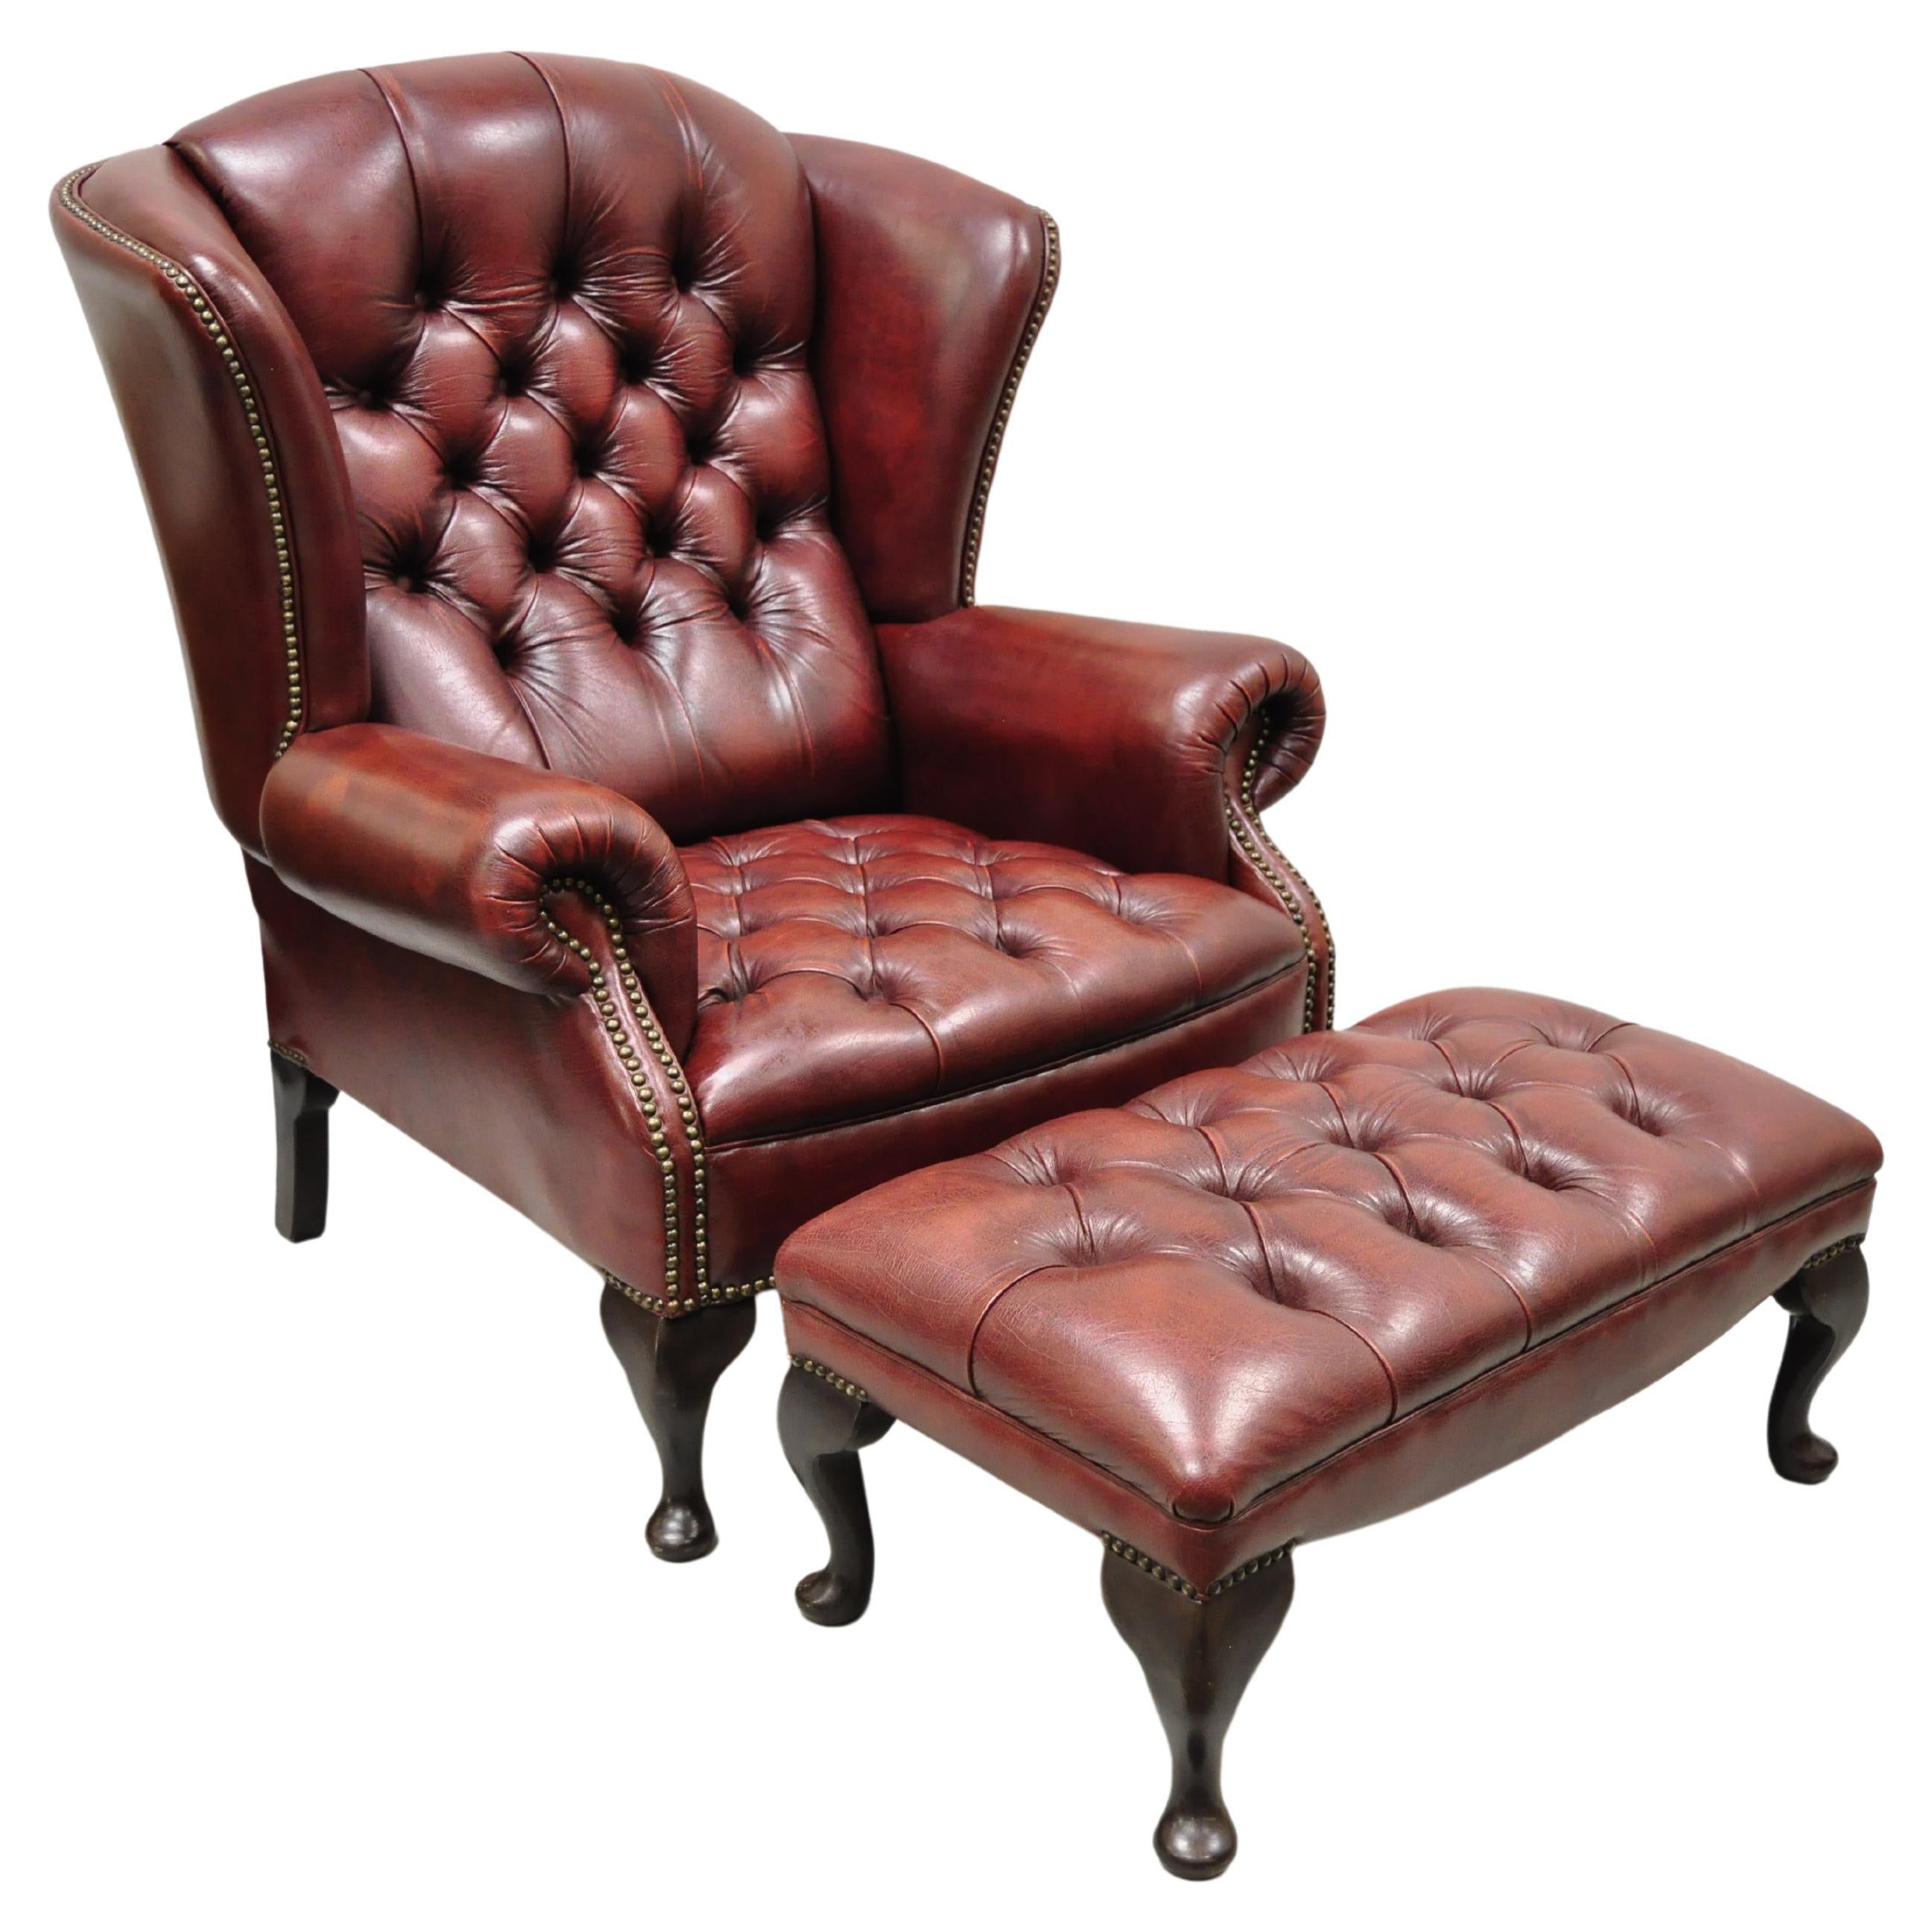 Vintage English Chesterfield Burgundy Leather Tufted Wingback Chair and Ottoman